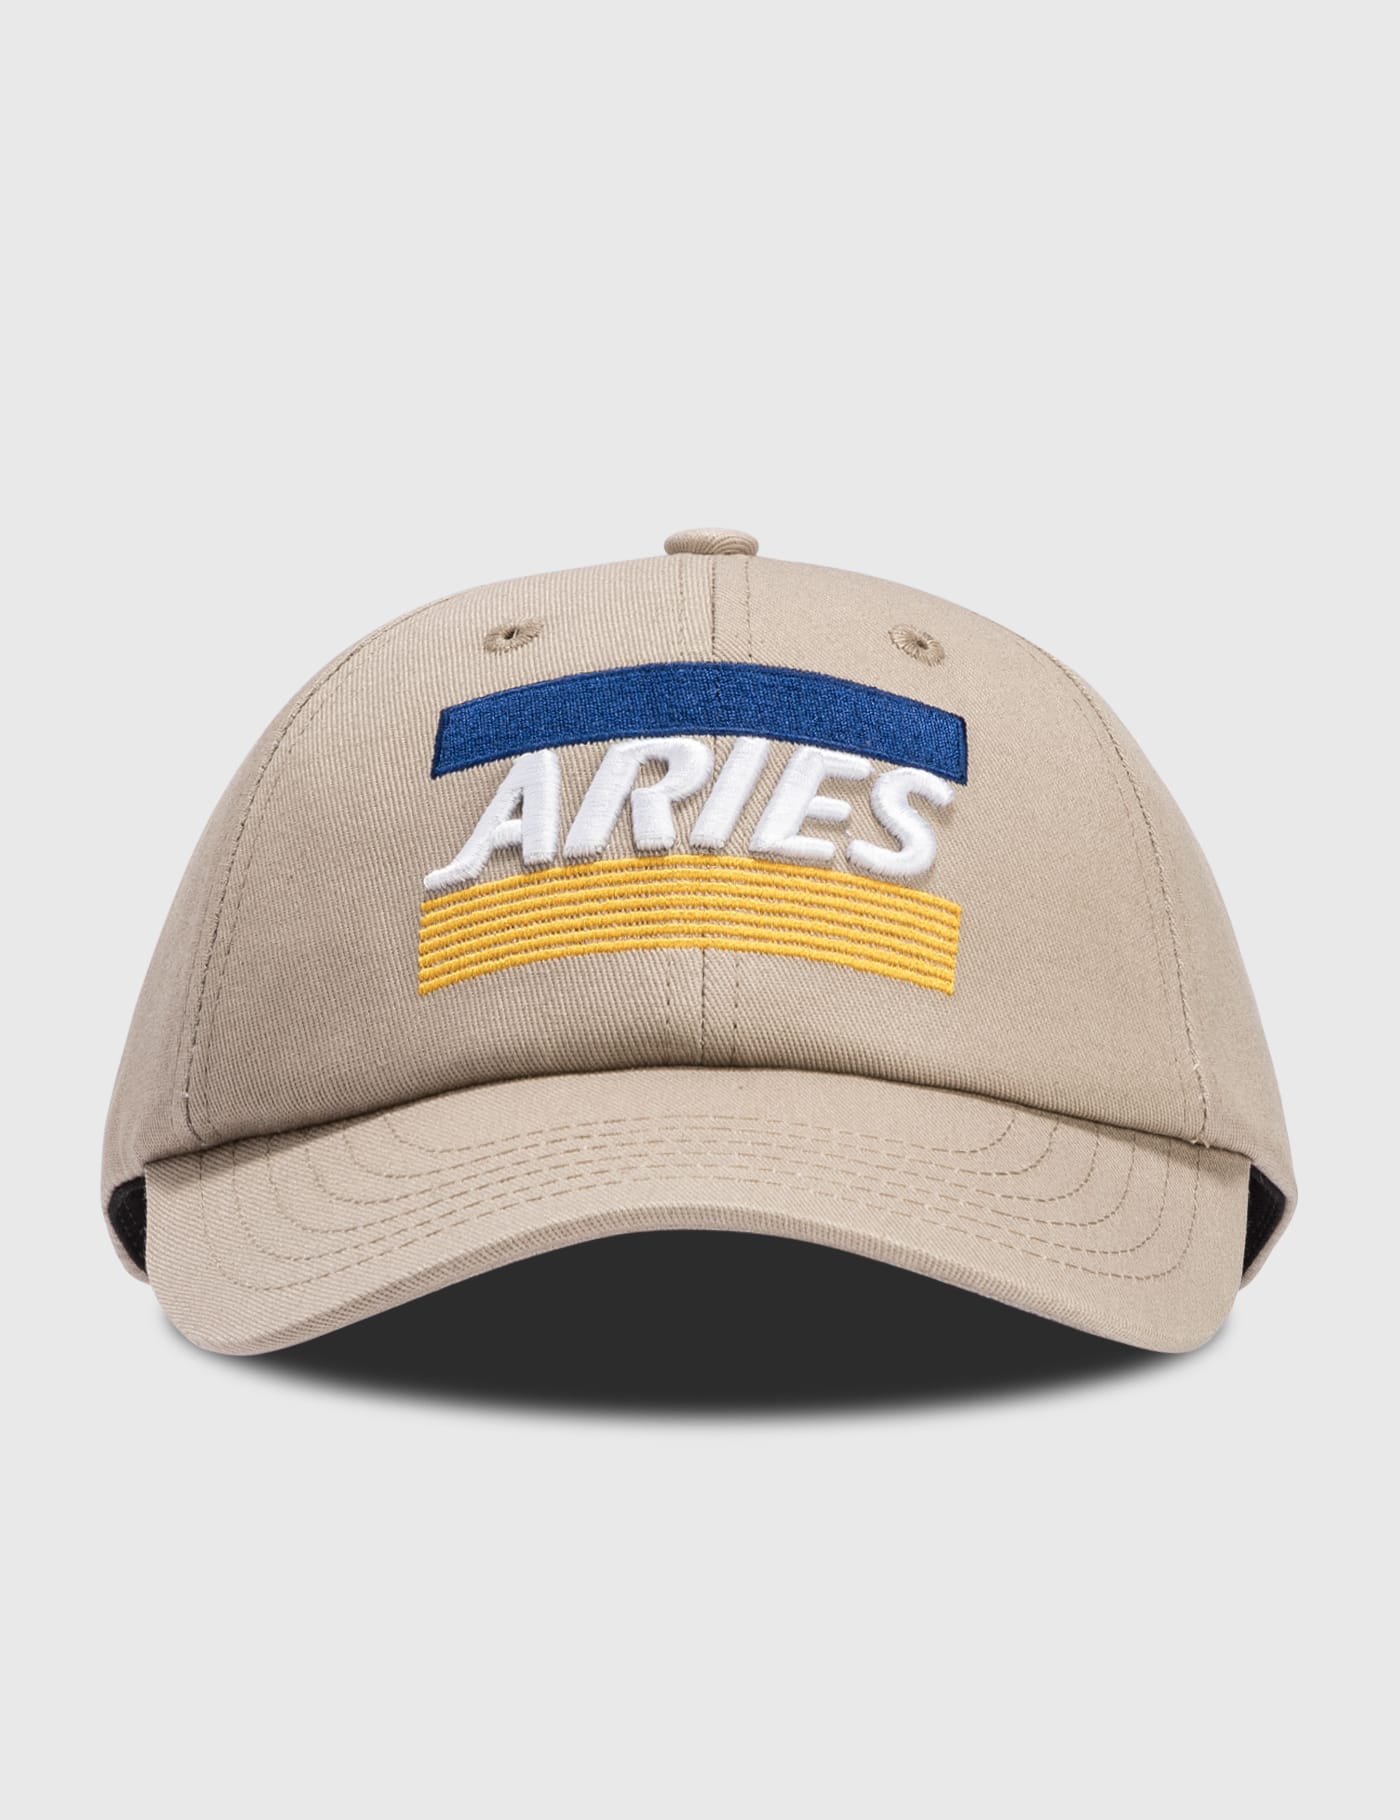 Aries - Credit Card Cap | HBX - Globally Curated Fashion and 